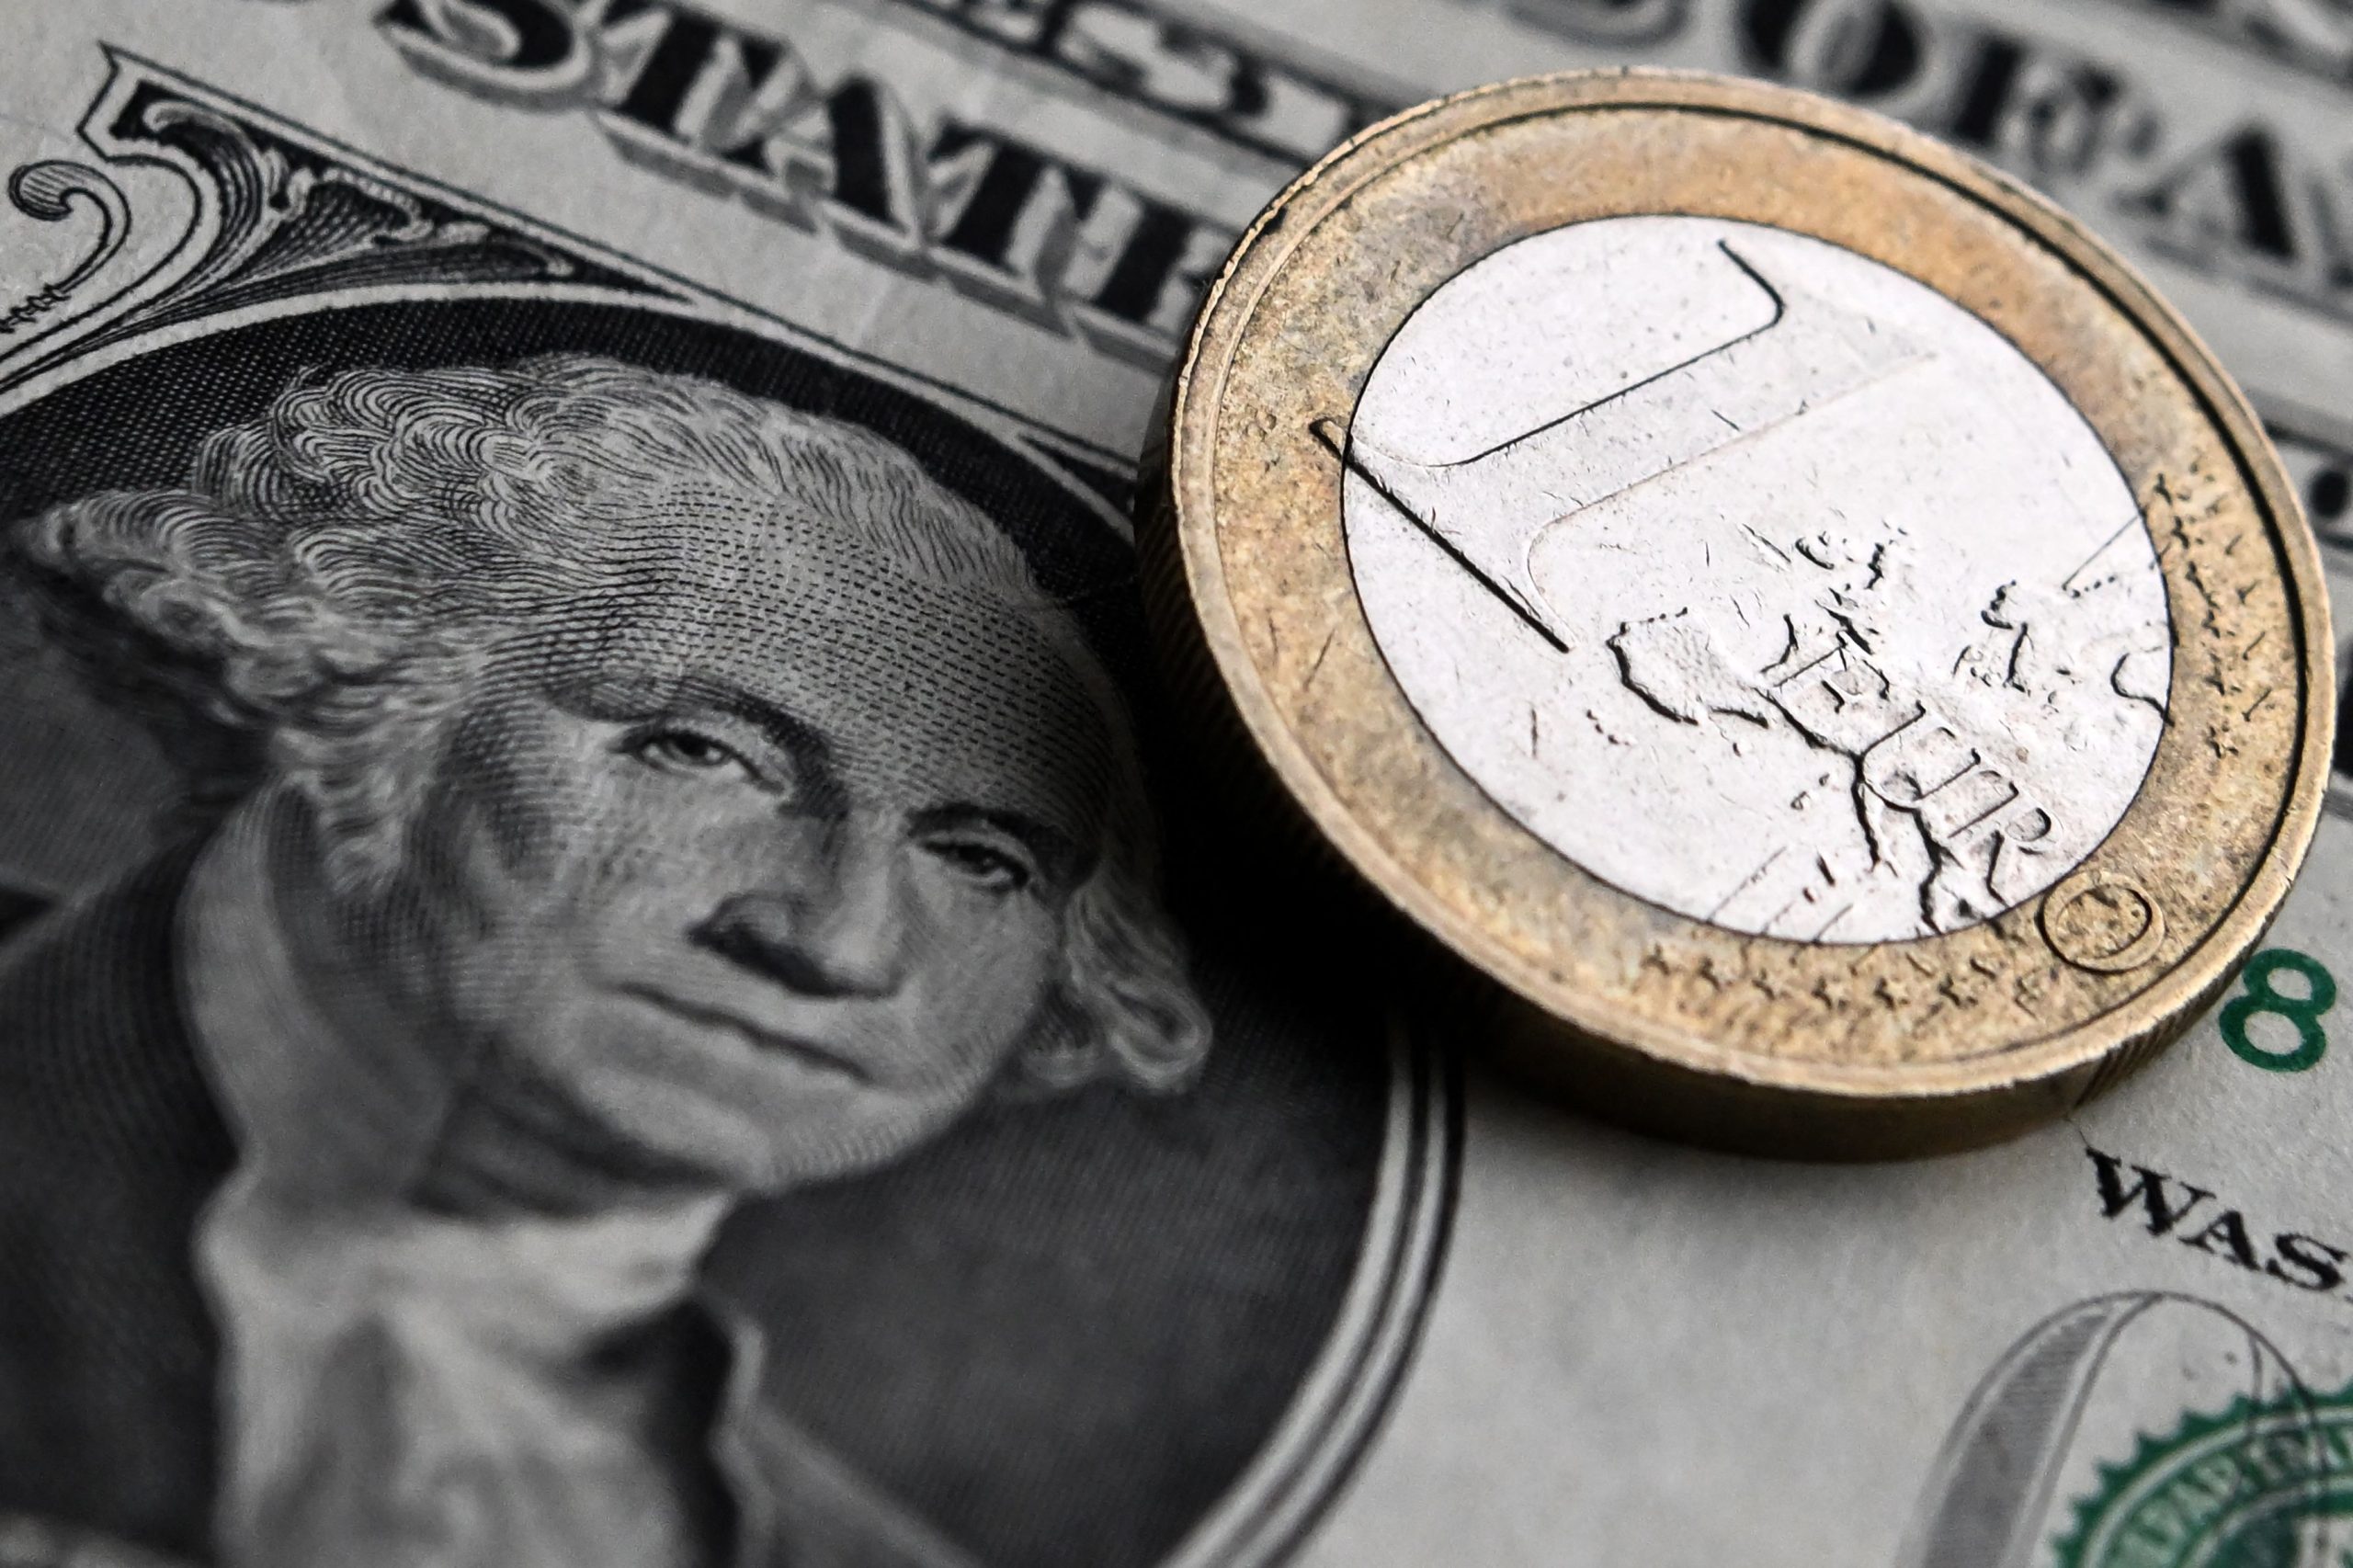 Investors Increase Wagers on Euro-Dollar Parity Amid Currency’s Decline